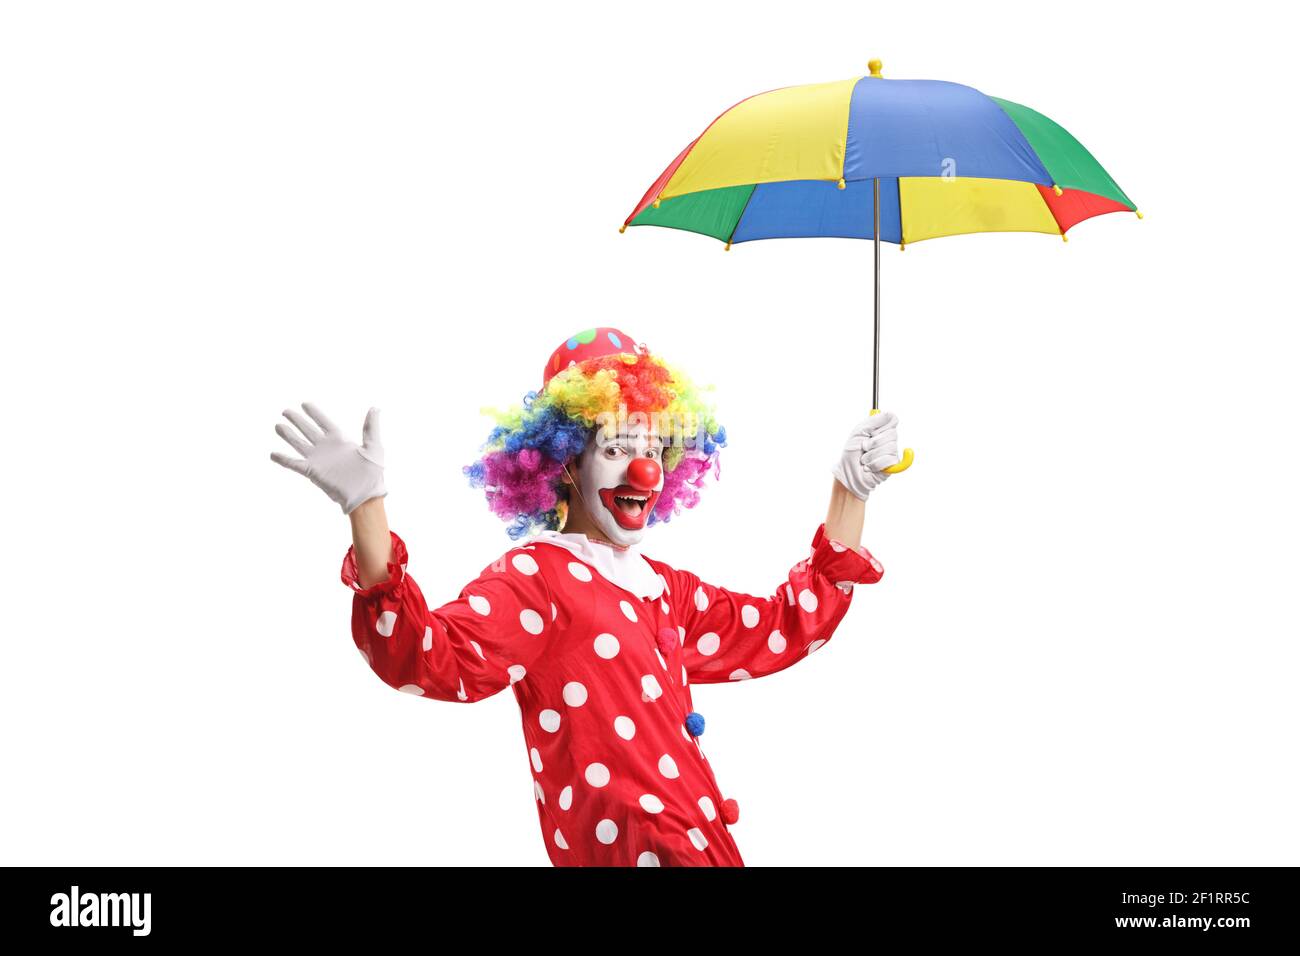 Clown waving and holding an umbrella isolated on white background Stock Photo